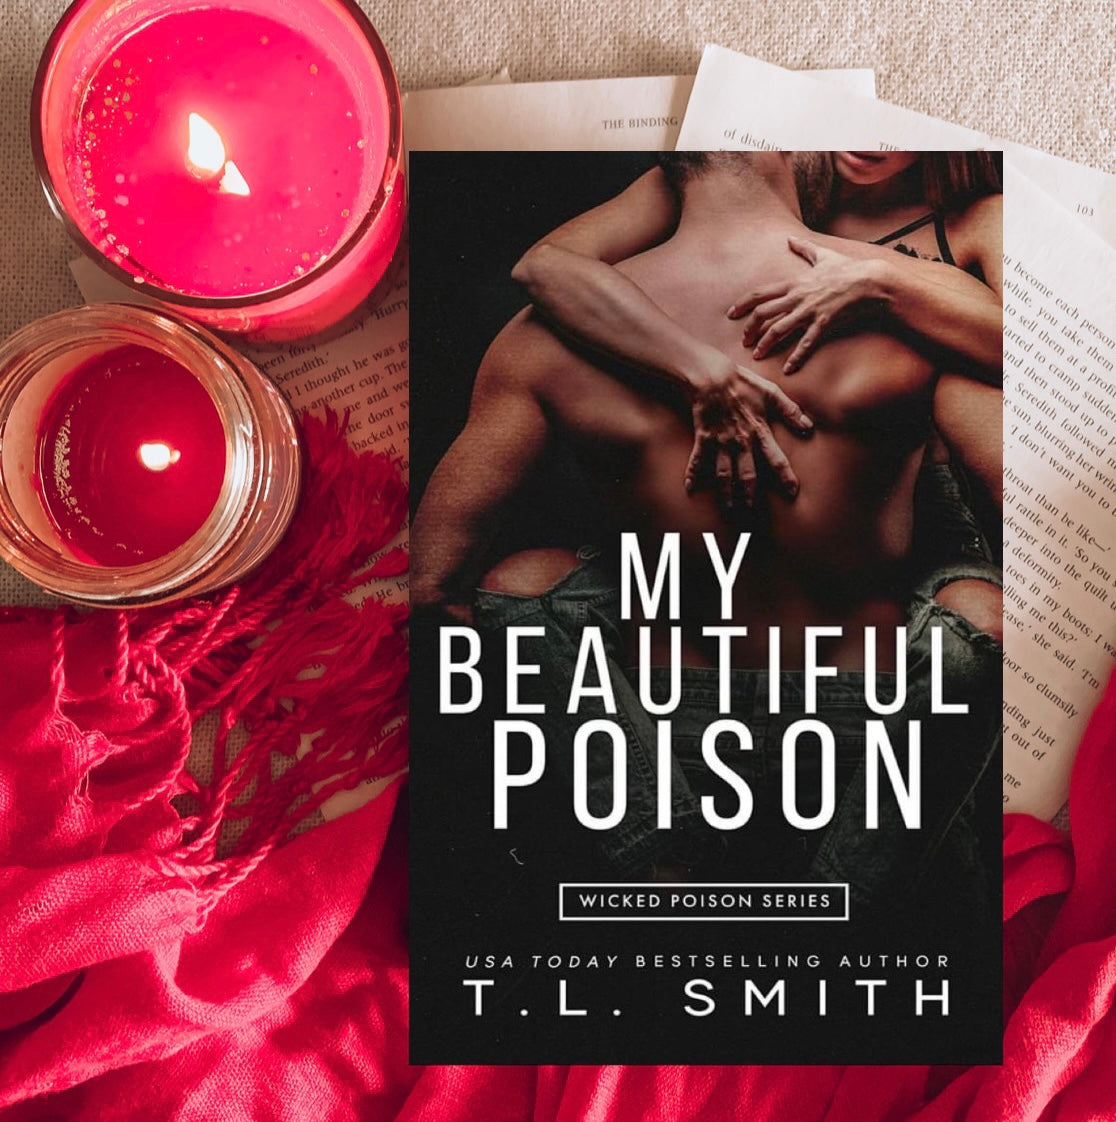 Wicked Poison Series  by T. L Smith